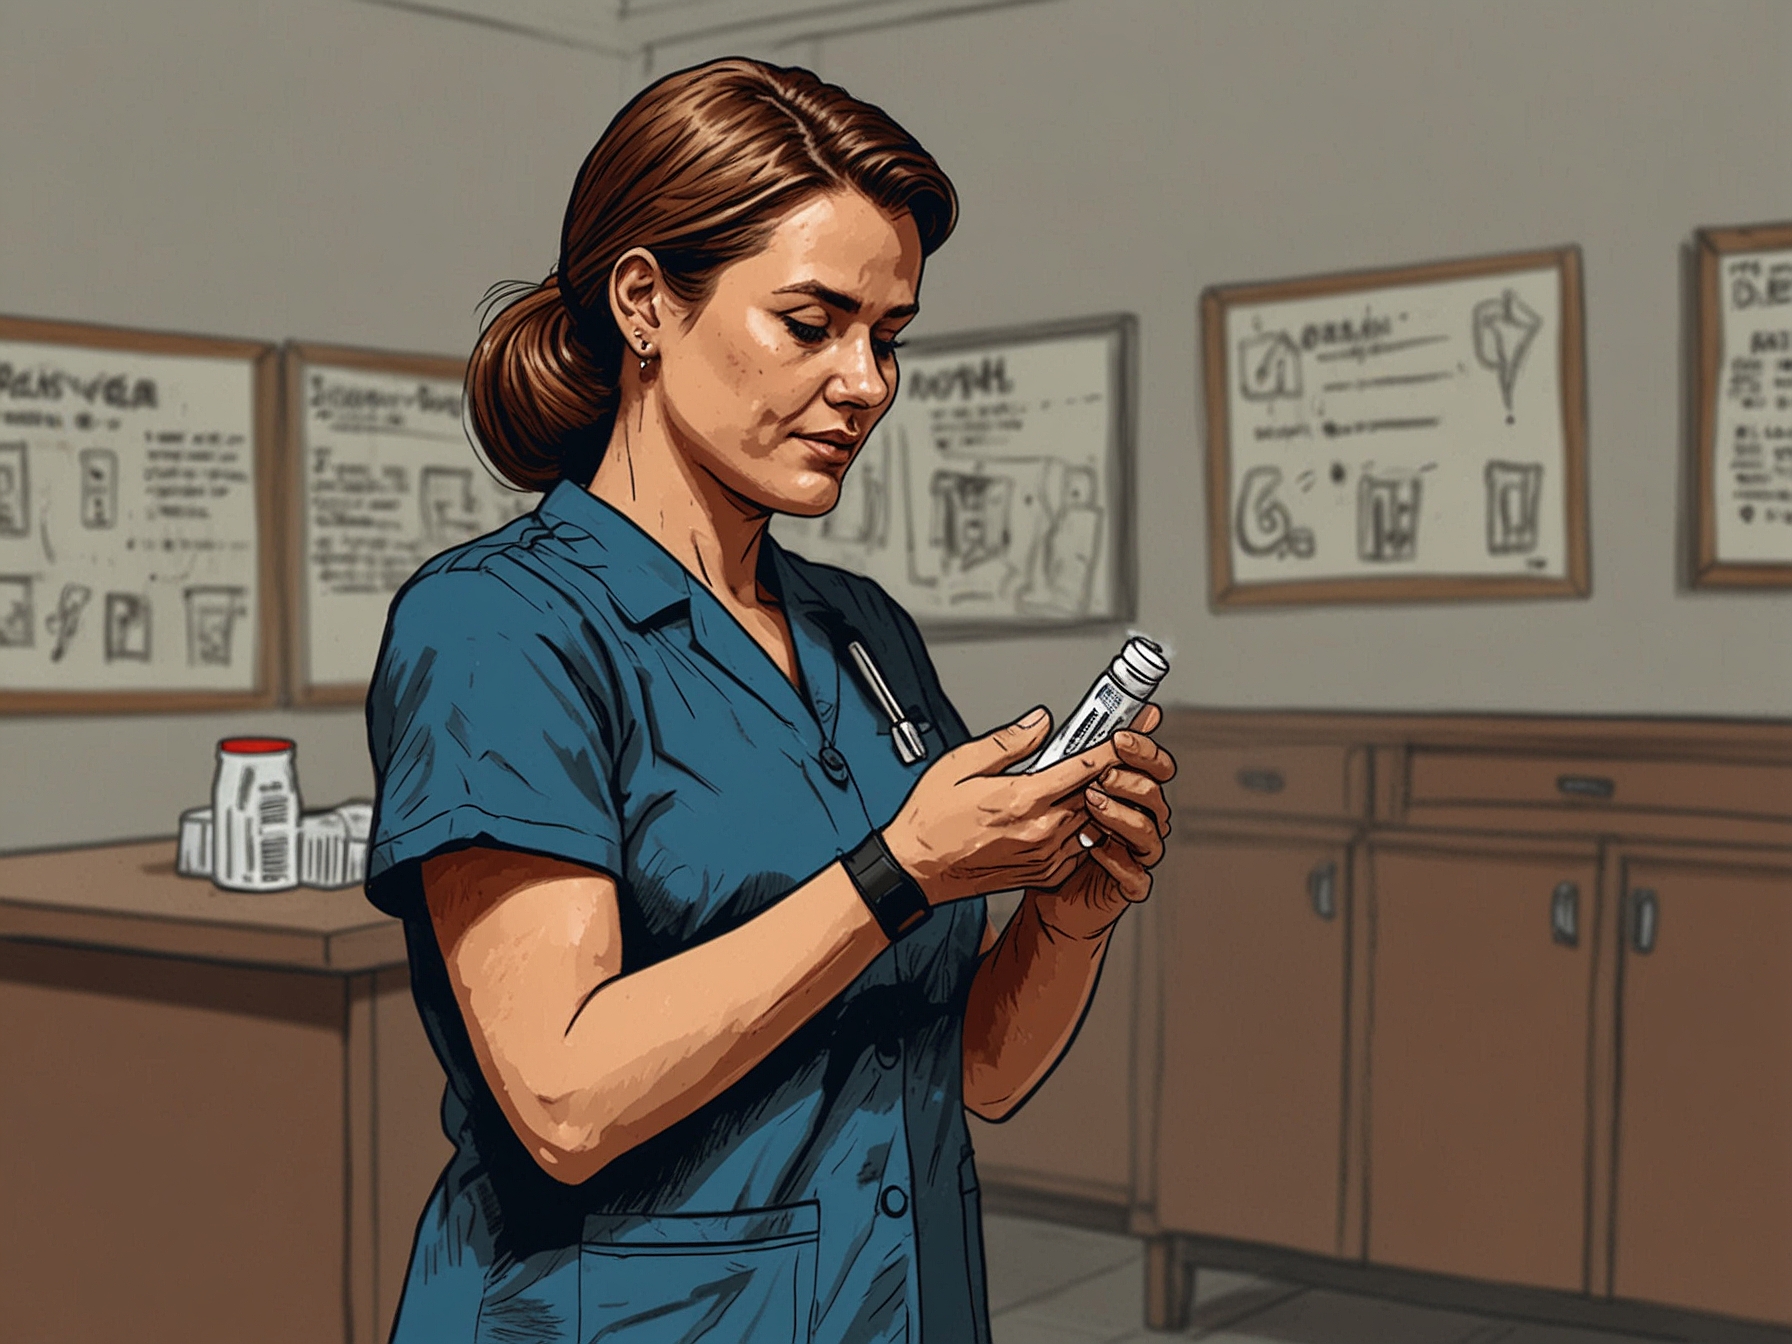 An image depicting a school nurse demonstrating the use of Narcan, highlighting its importance in reversing opioid overdoses and saving lives.